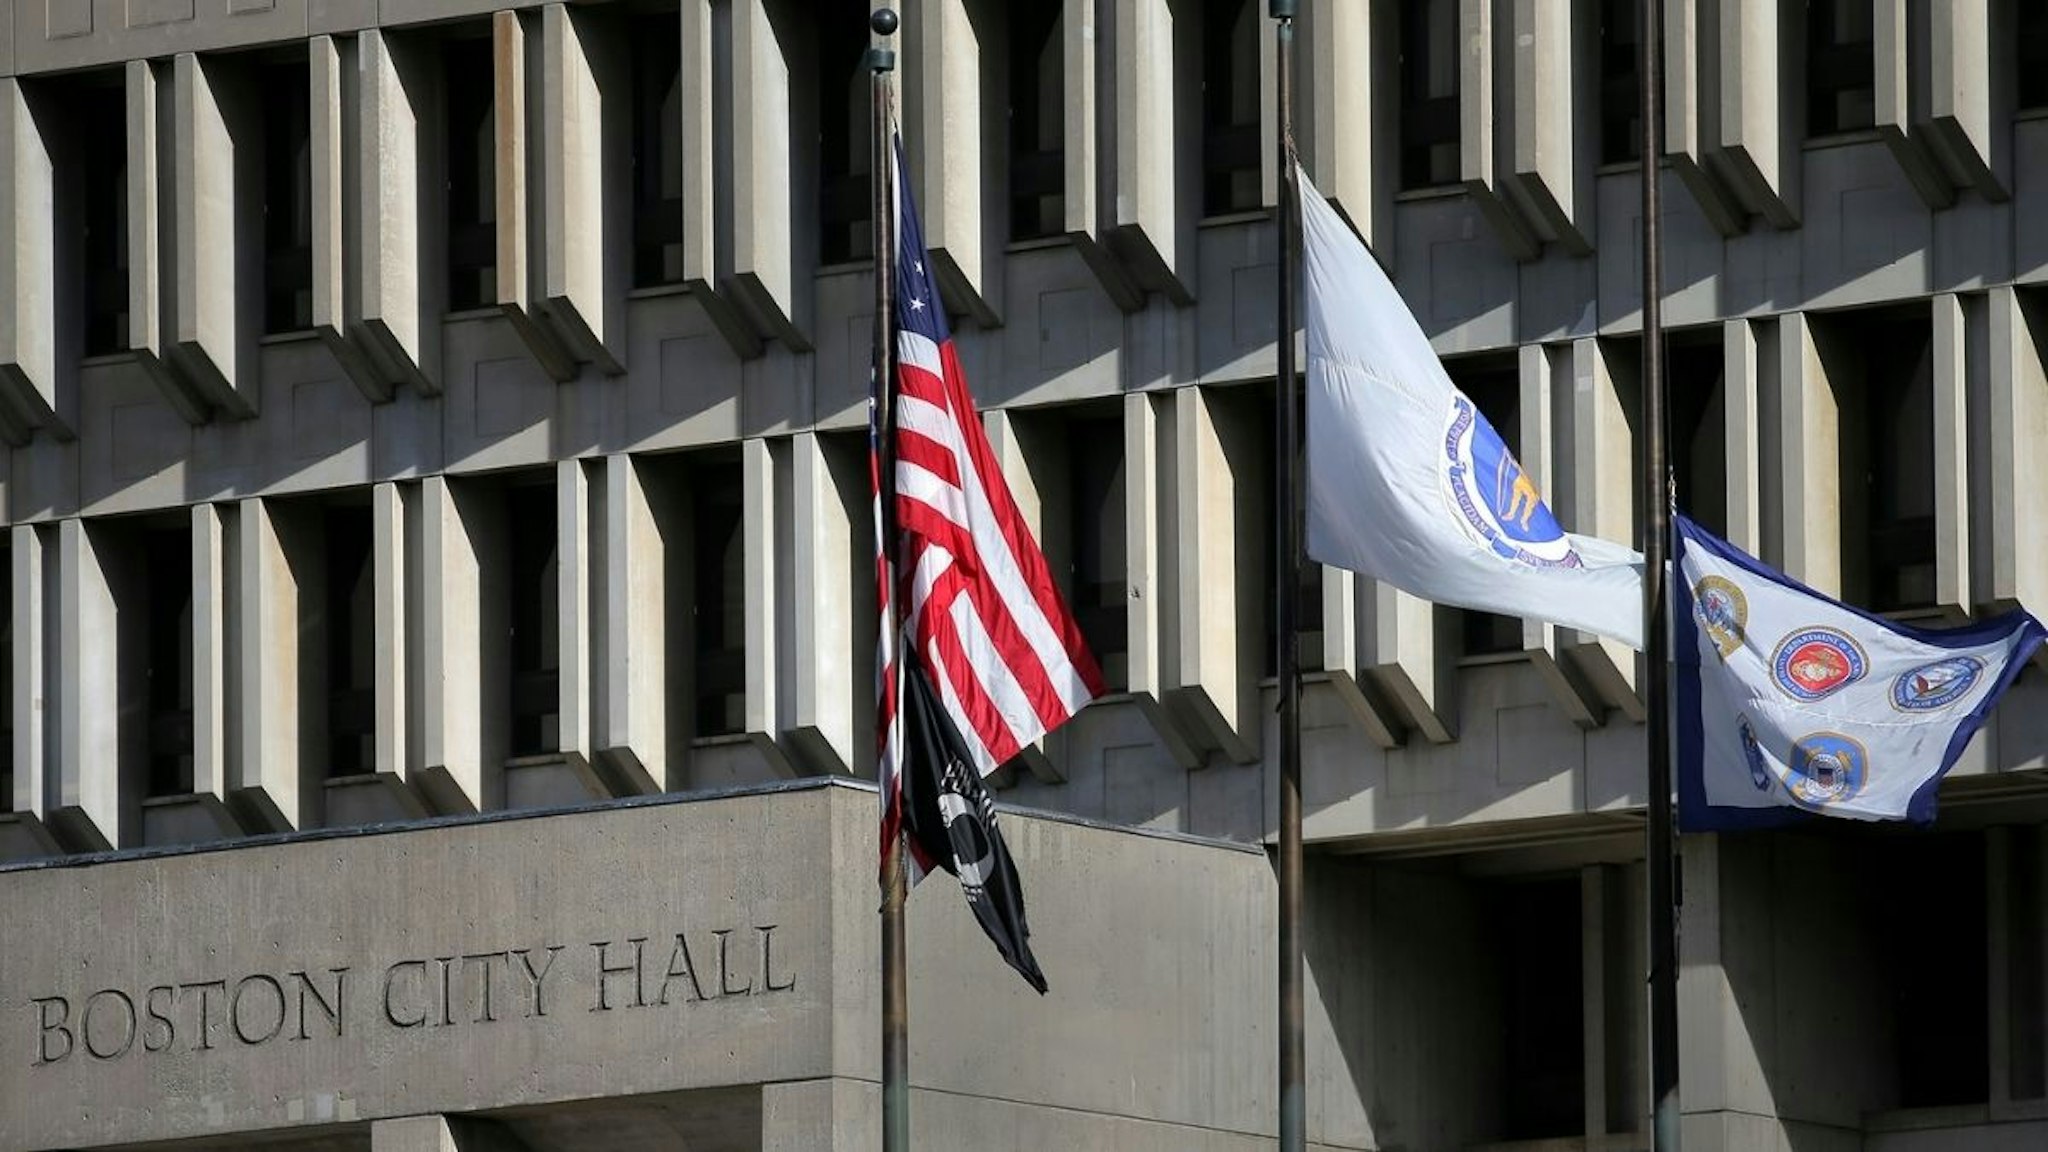 Flags fly above Boston City Hall on November 11, 2021.